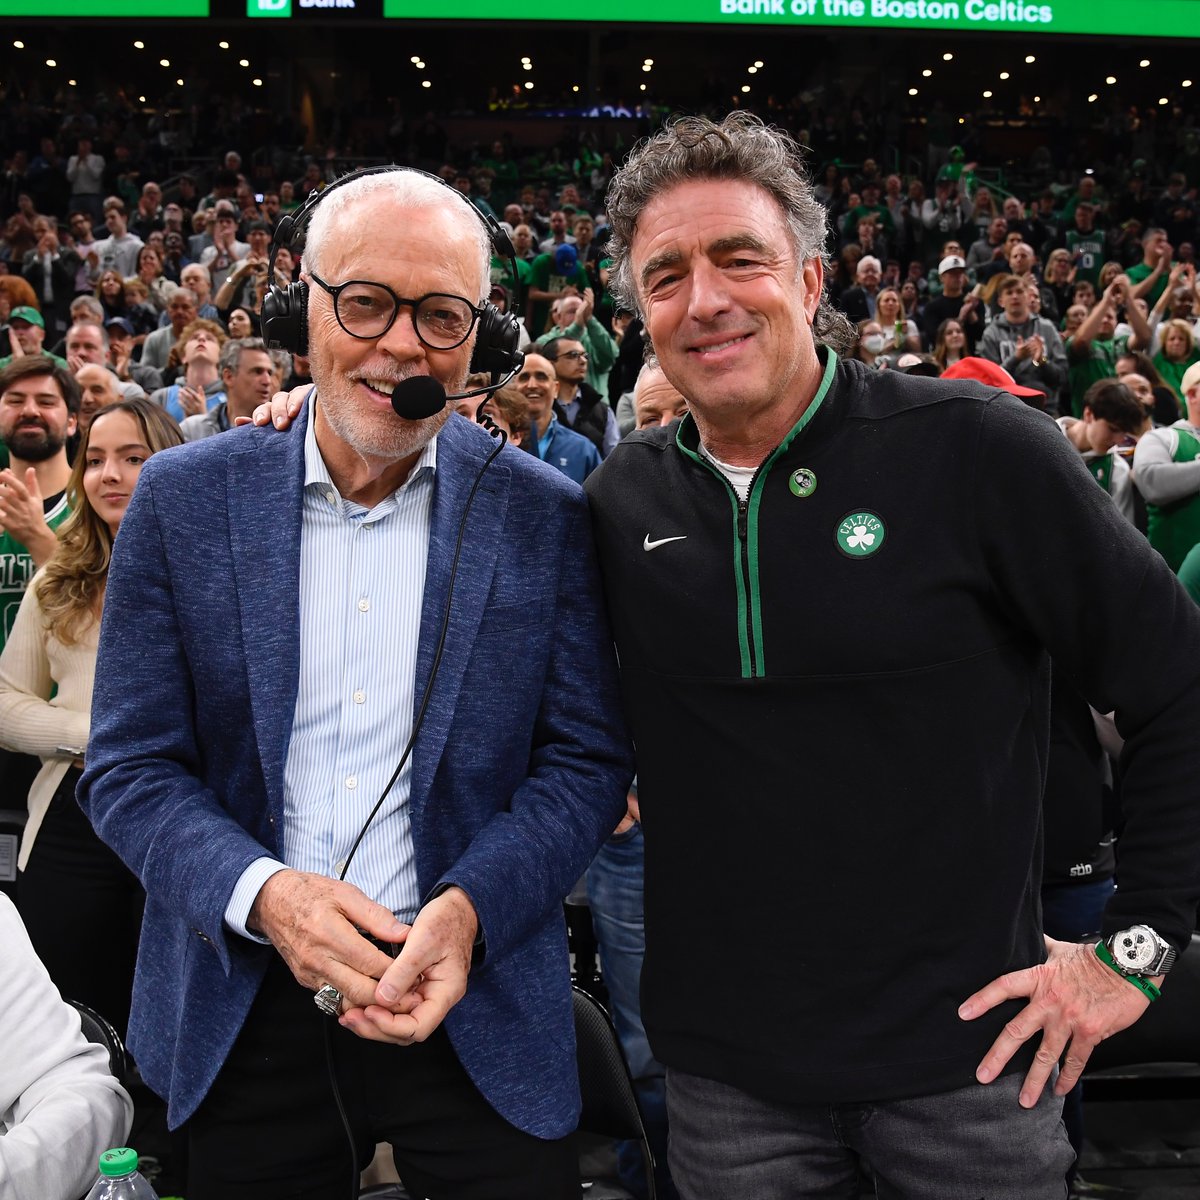 Gonna miss hearing GOT IT 🗣️🎙️ Thank you for everything @celticsvoice